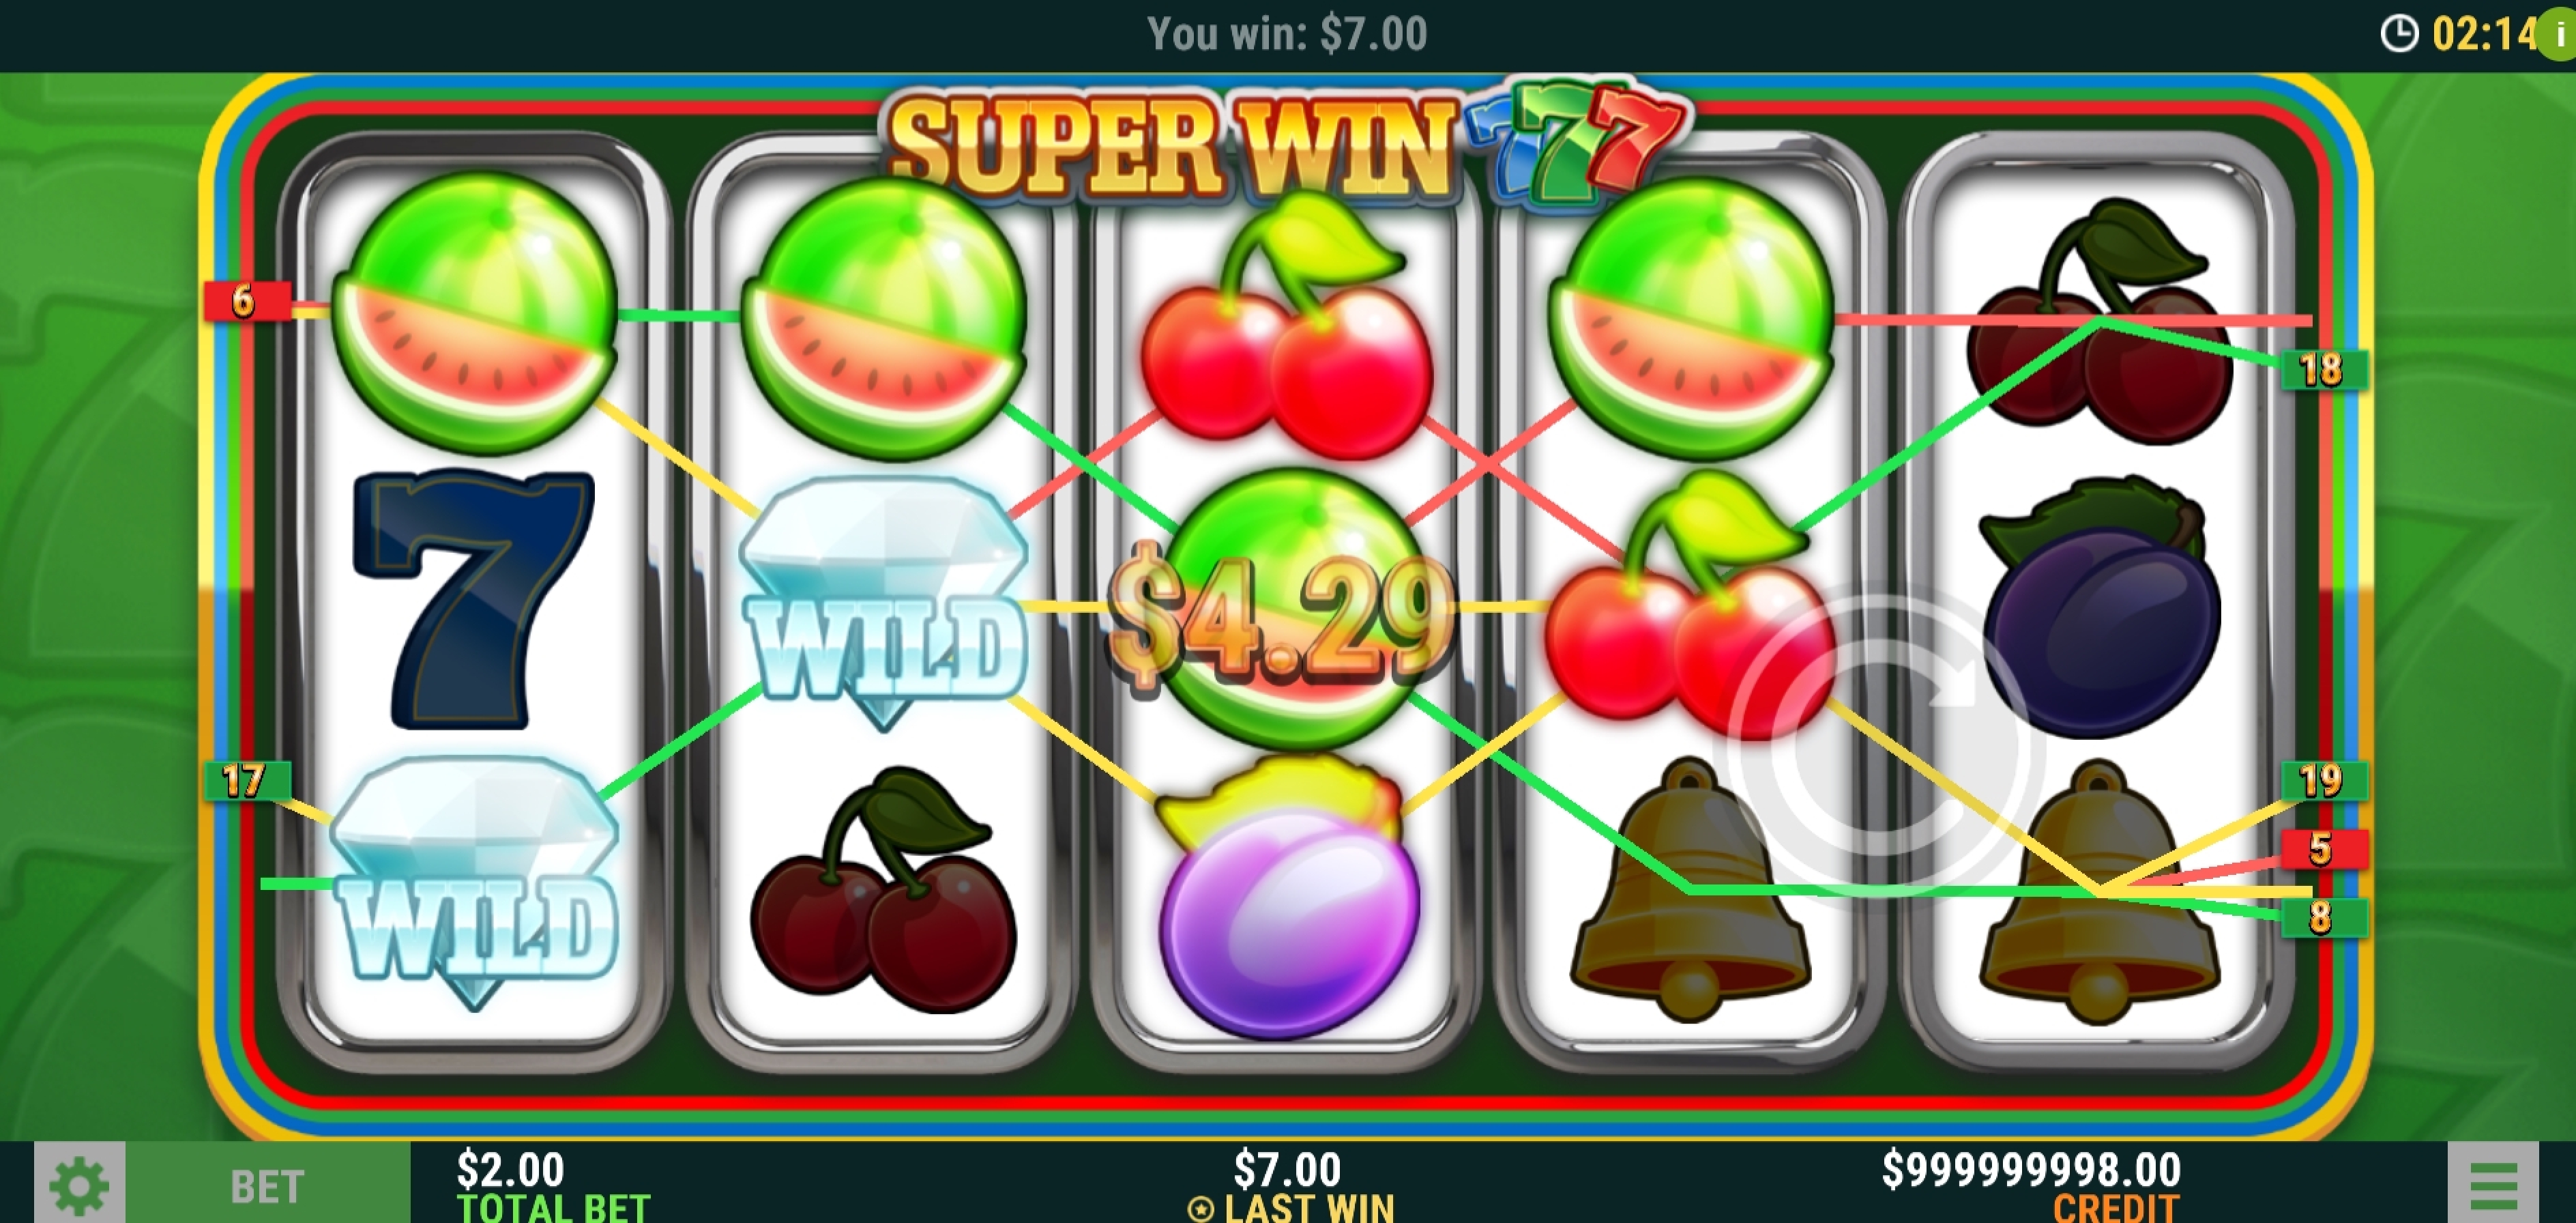 Win Money in Super Win Free Slot Game by Slot Factory